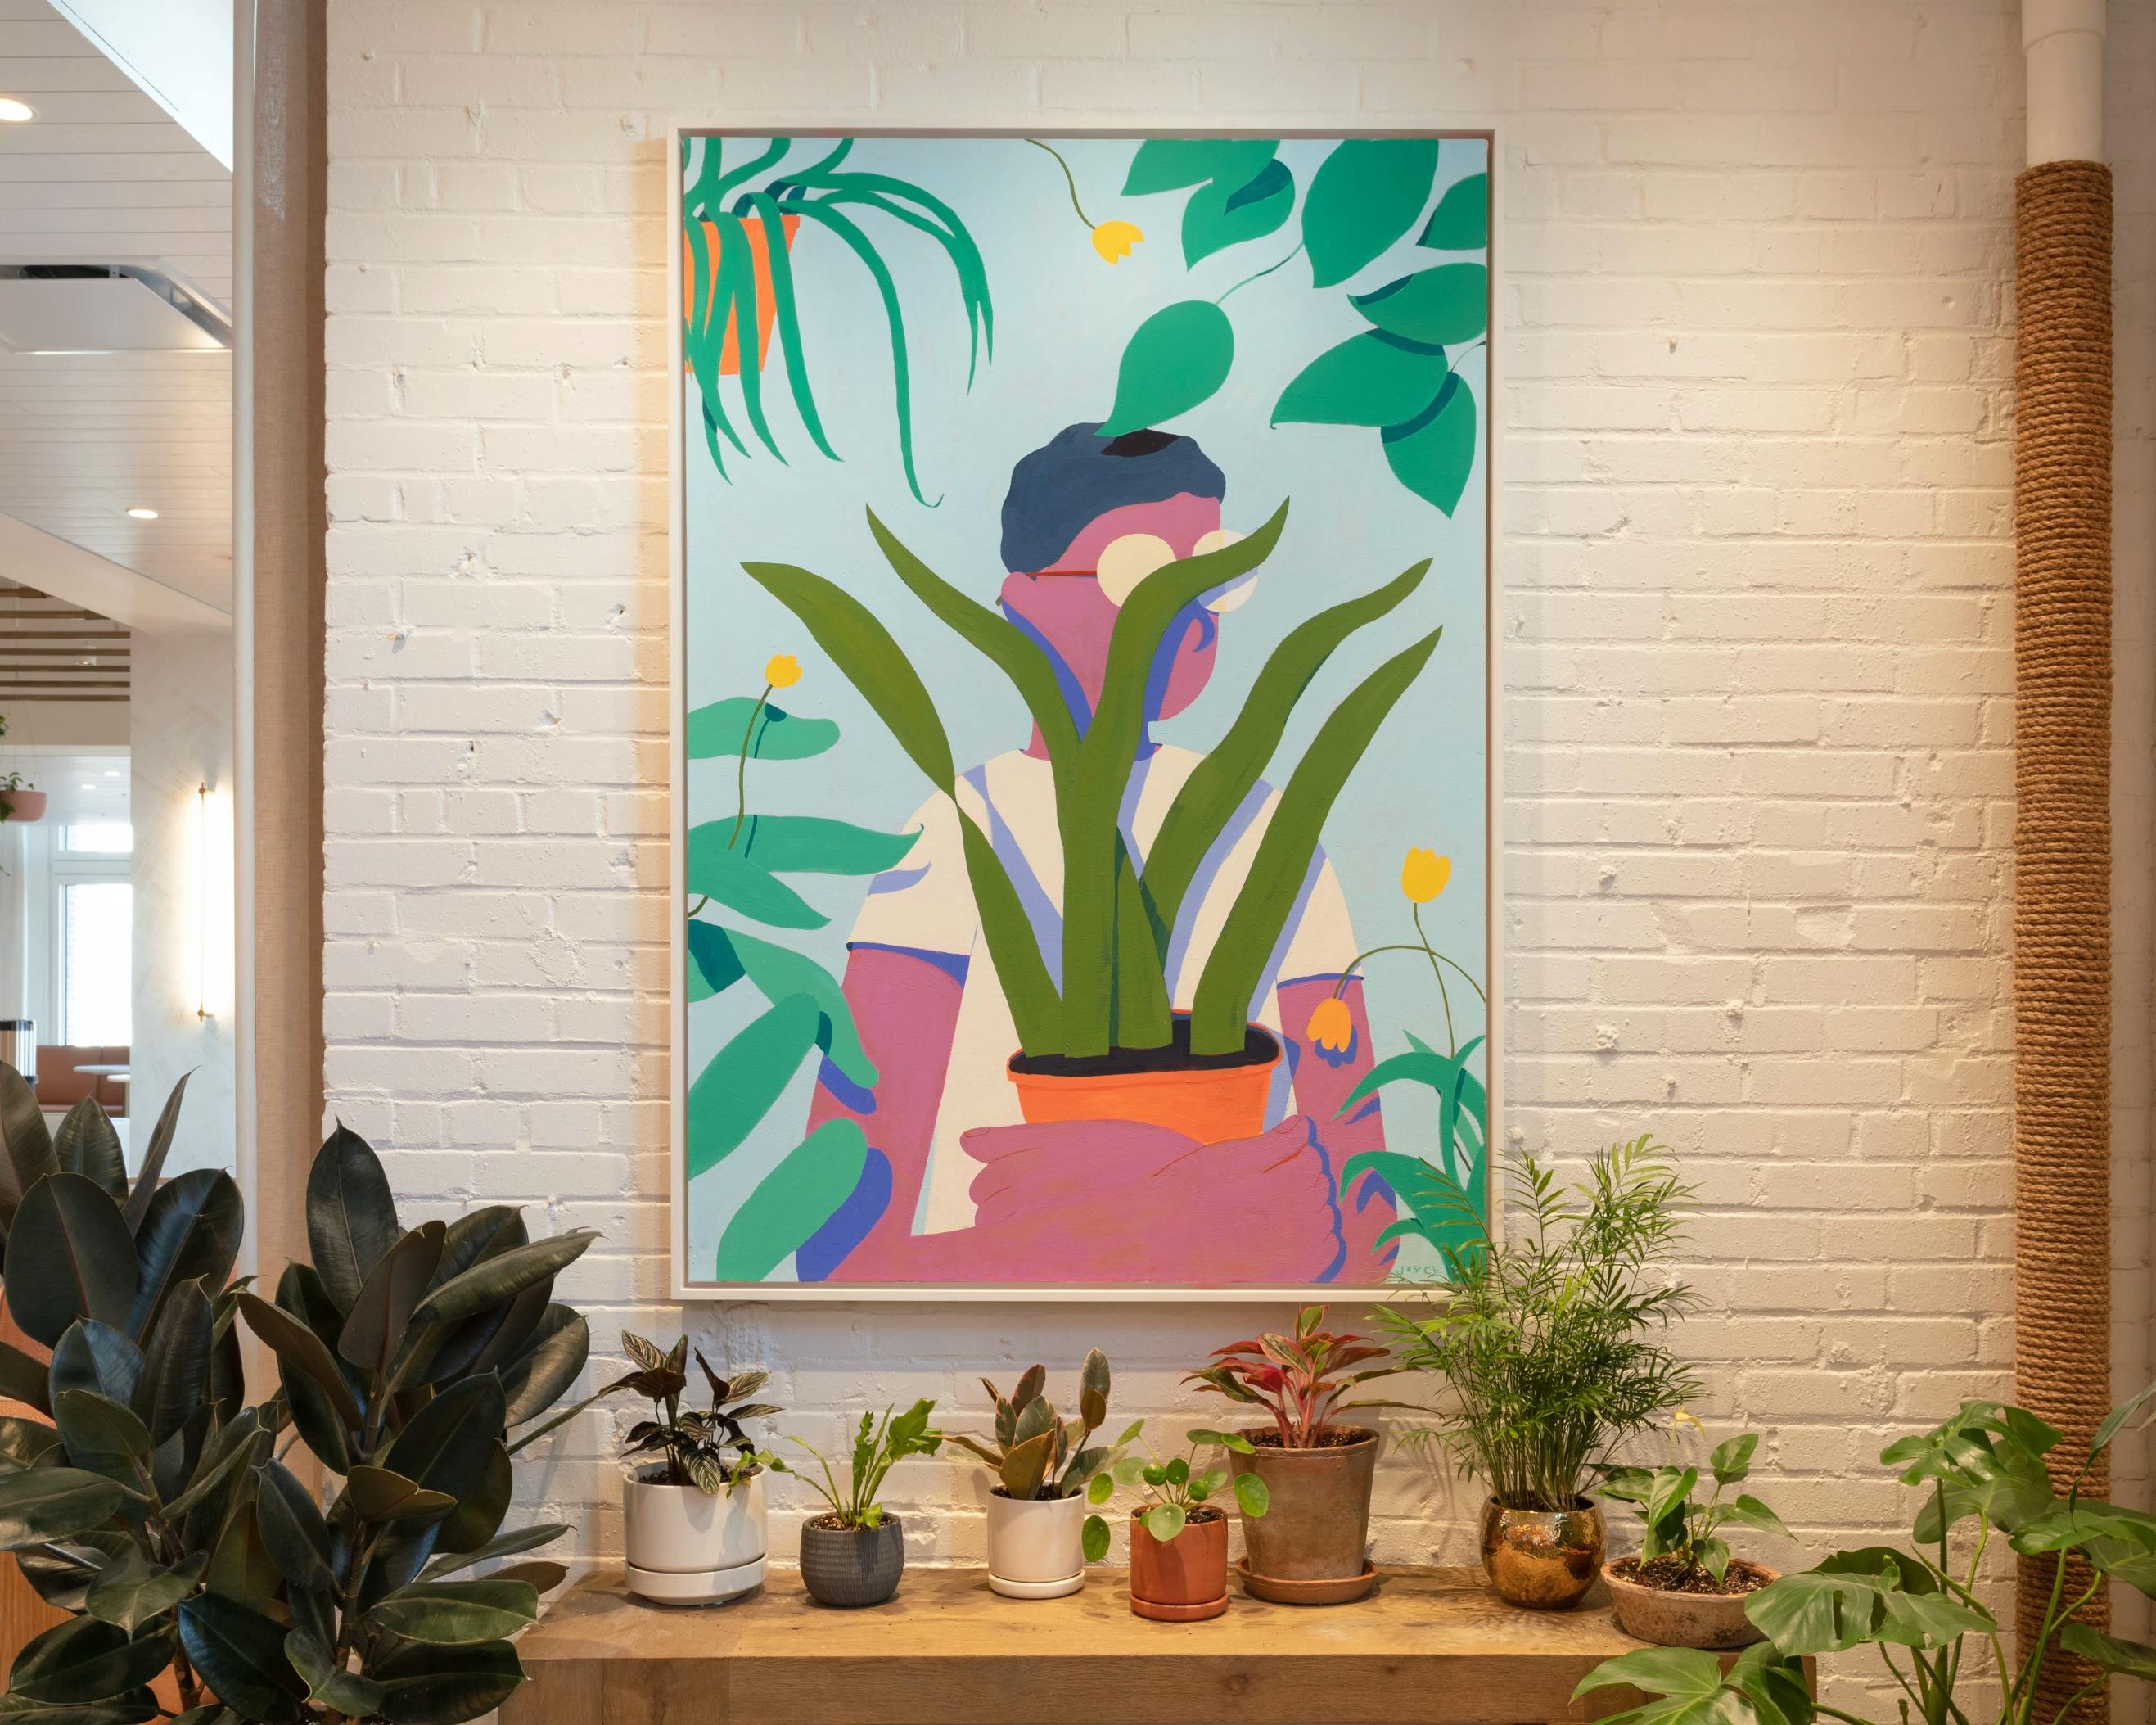 A painting by artist Jackson Joyce, depicting a person wearing glasses and standing among plants, installed above a table full of houseplants.